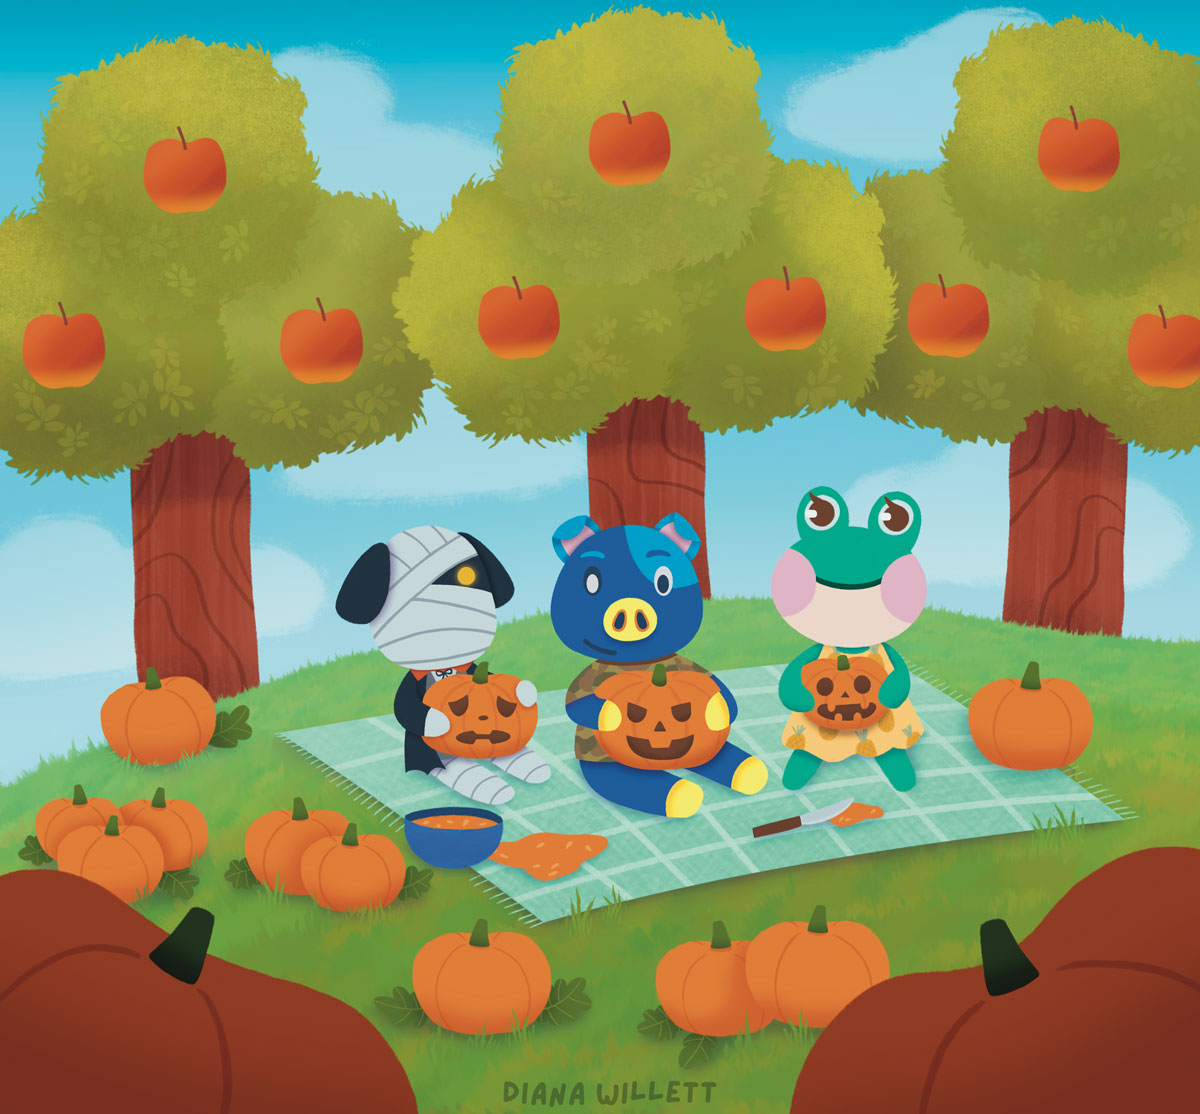 Kidlit Illustration by Diana Willett of lucky, hugh, and lily from animal crossing making jack o lanterns outside on a blanket. surrounded by pumpkins and apple trees.